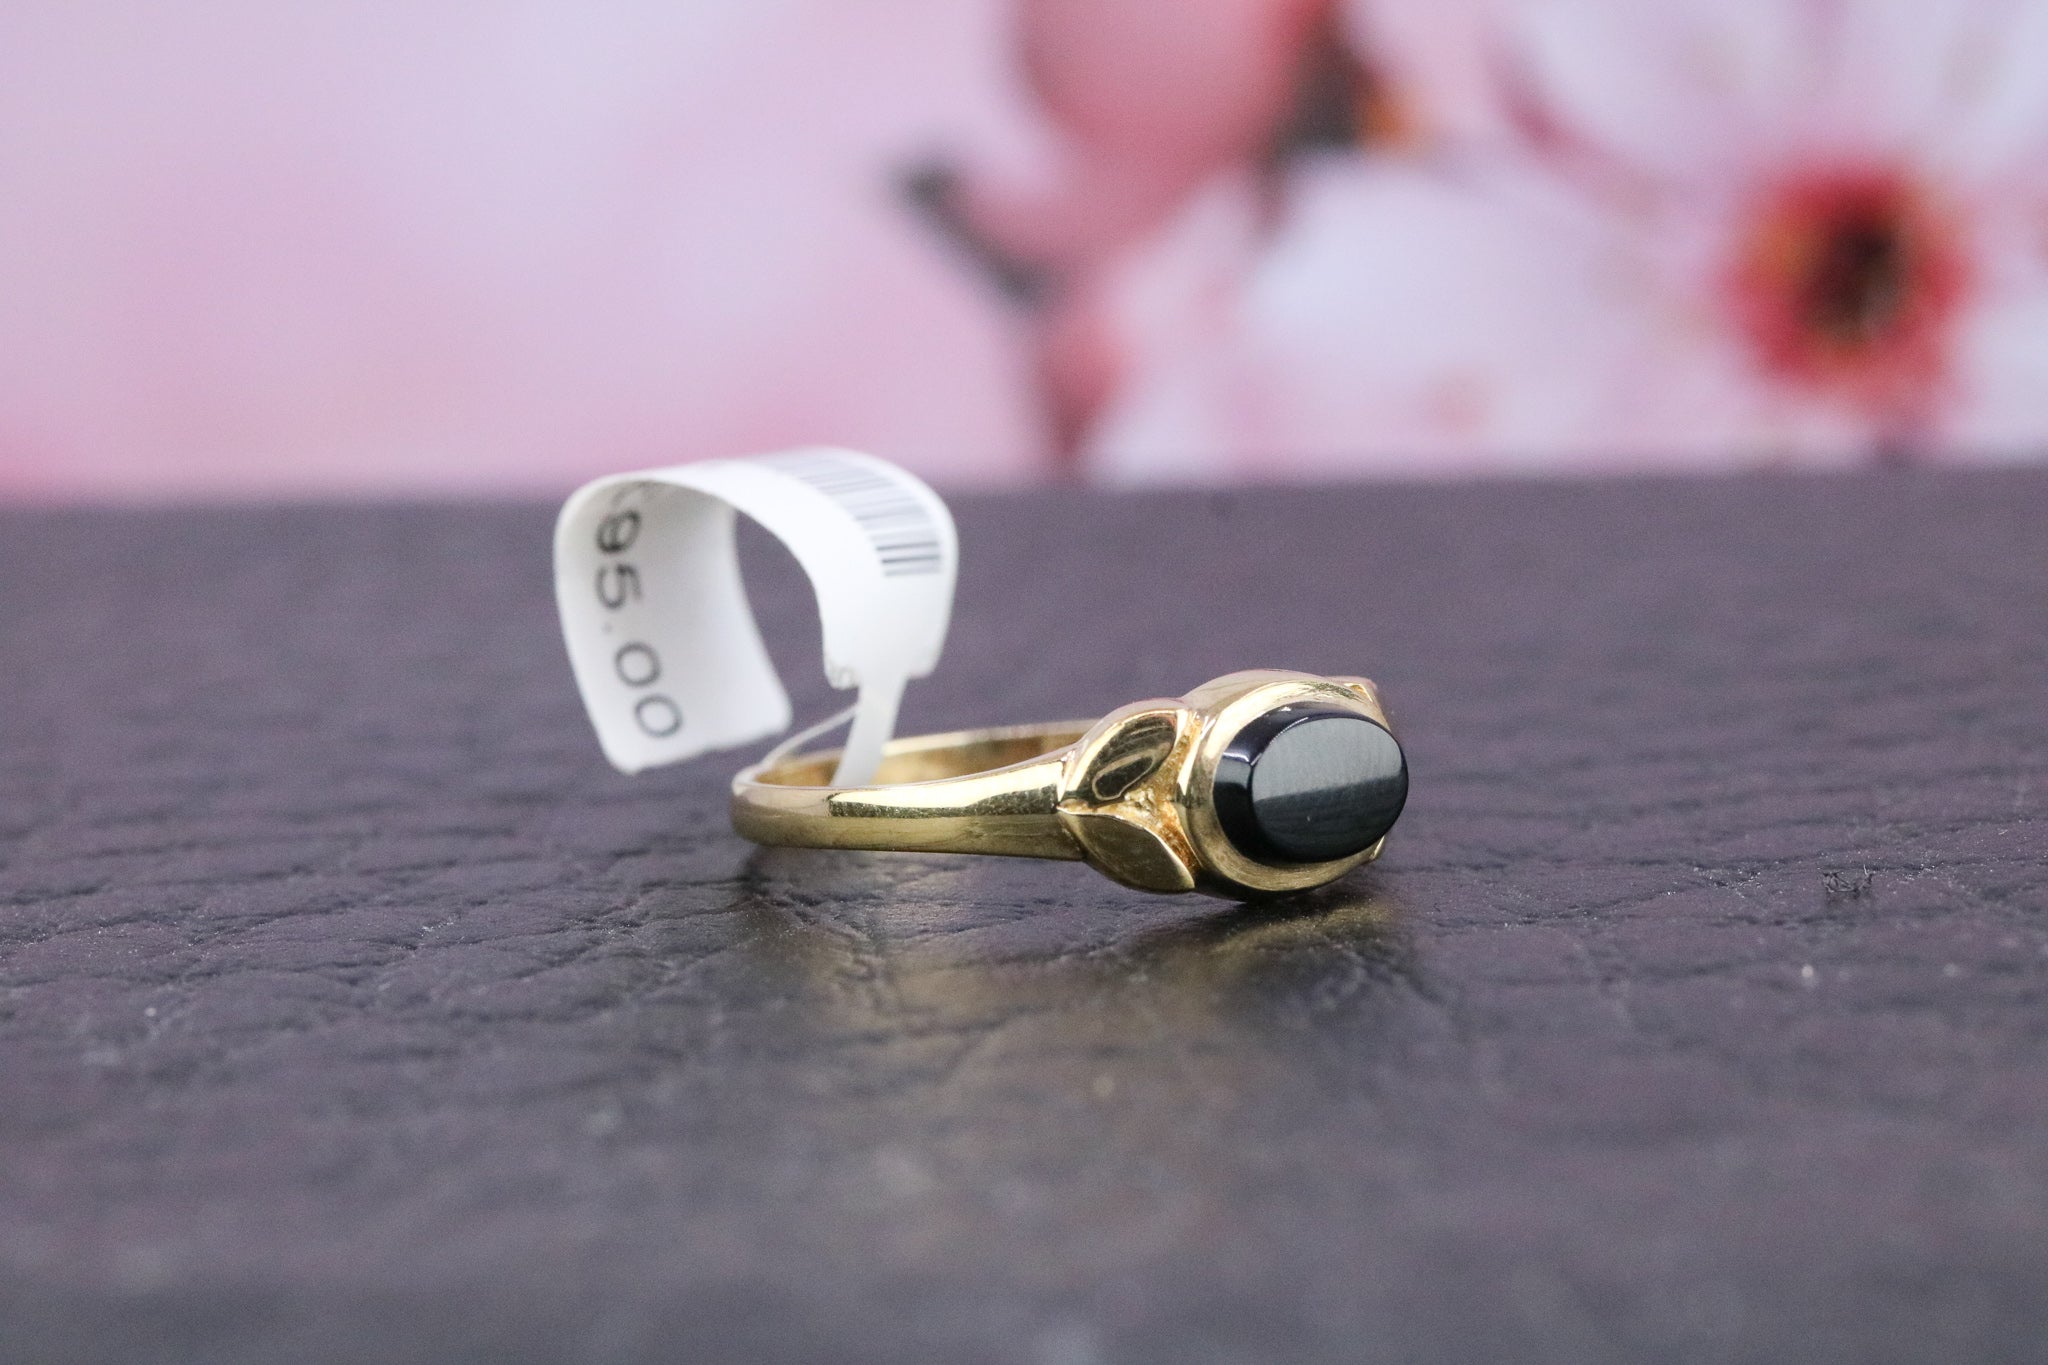 9ct Gold Onyx Ring - CO1391 - Hallmark Jewellers Formby & The Jewellers Bench Widnes